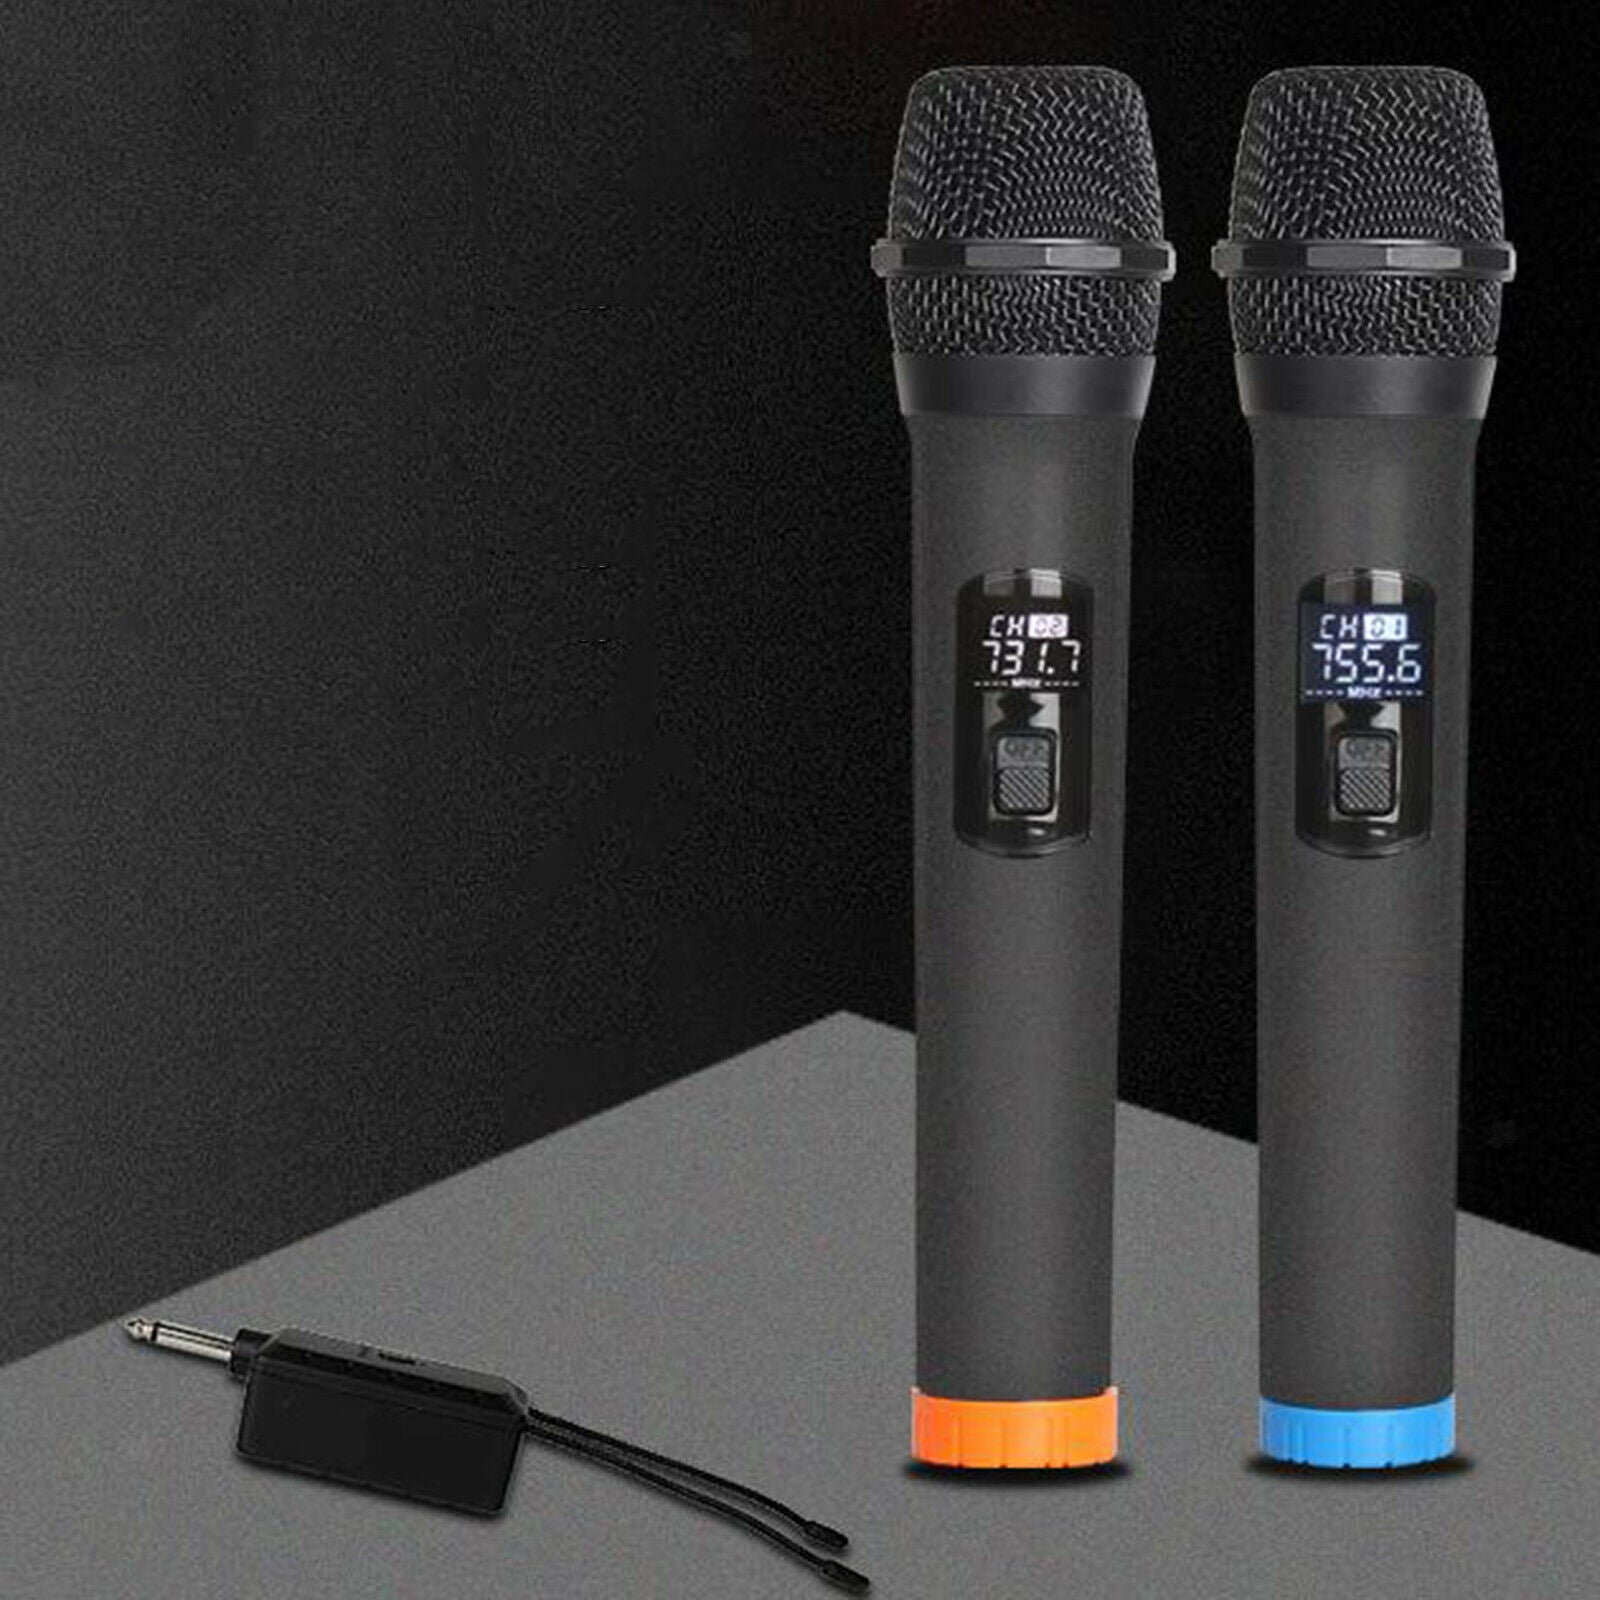 2x Wireless Microphone, VHF Cordless Handheld Mic System with Rechargeable